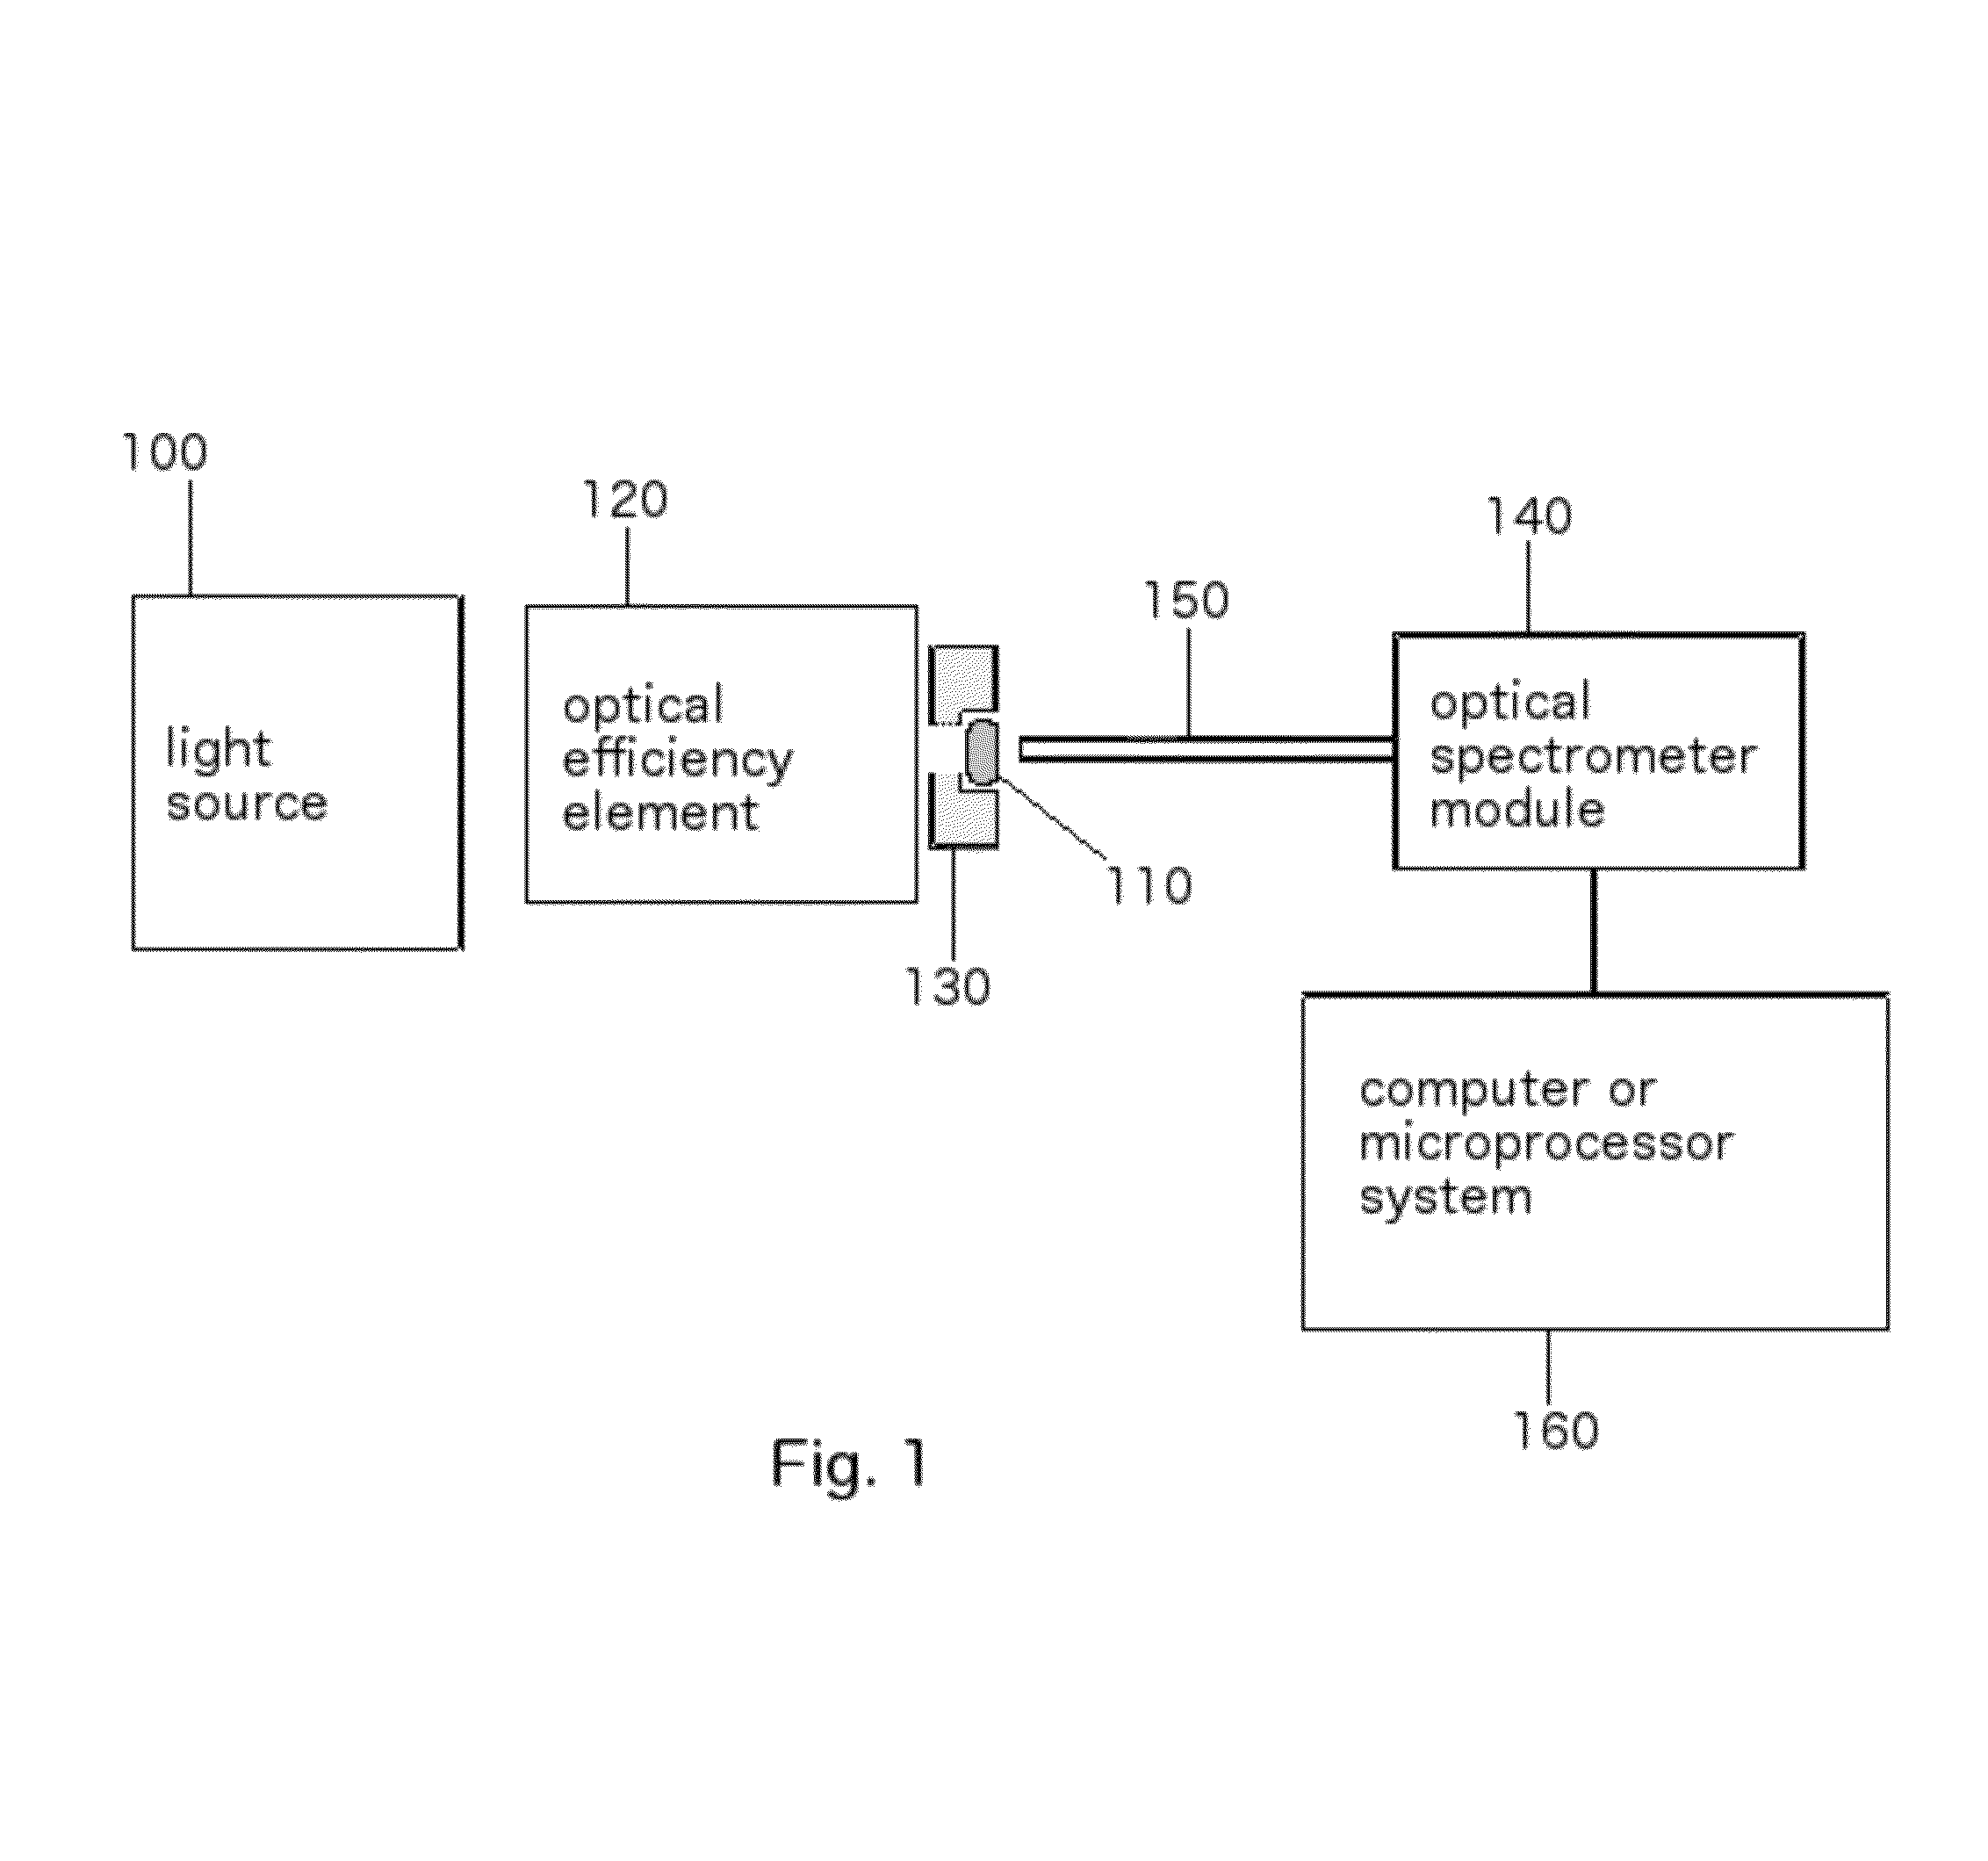 Optical analyzer for identification of materials using reflectance spectroscopy